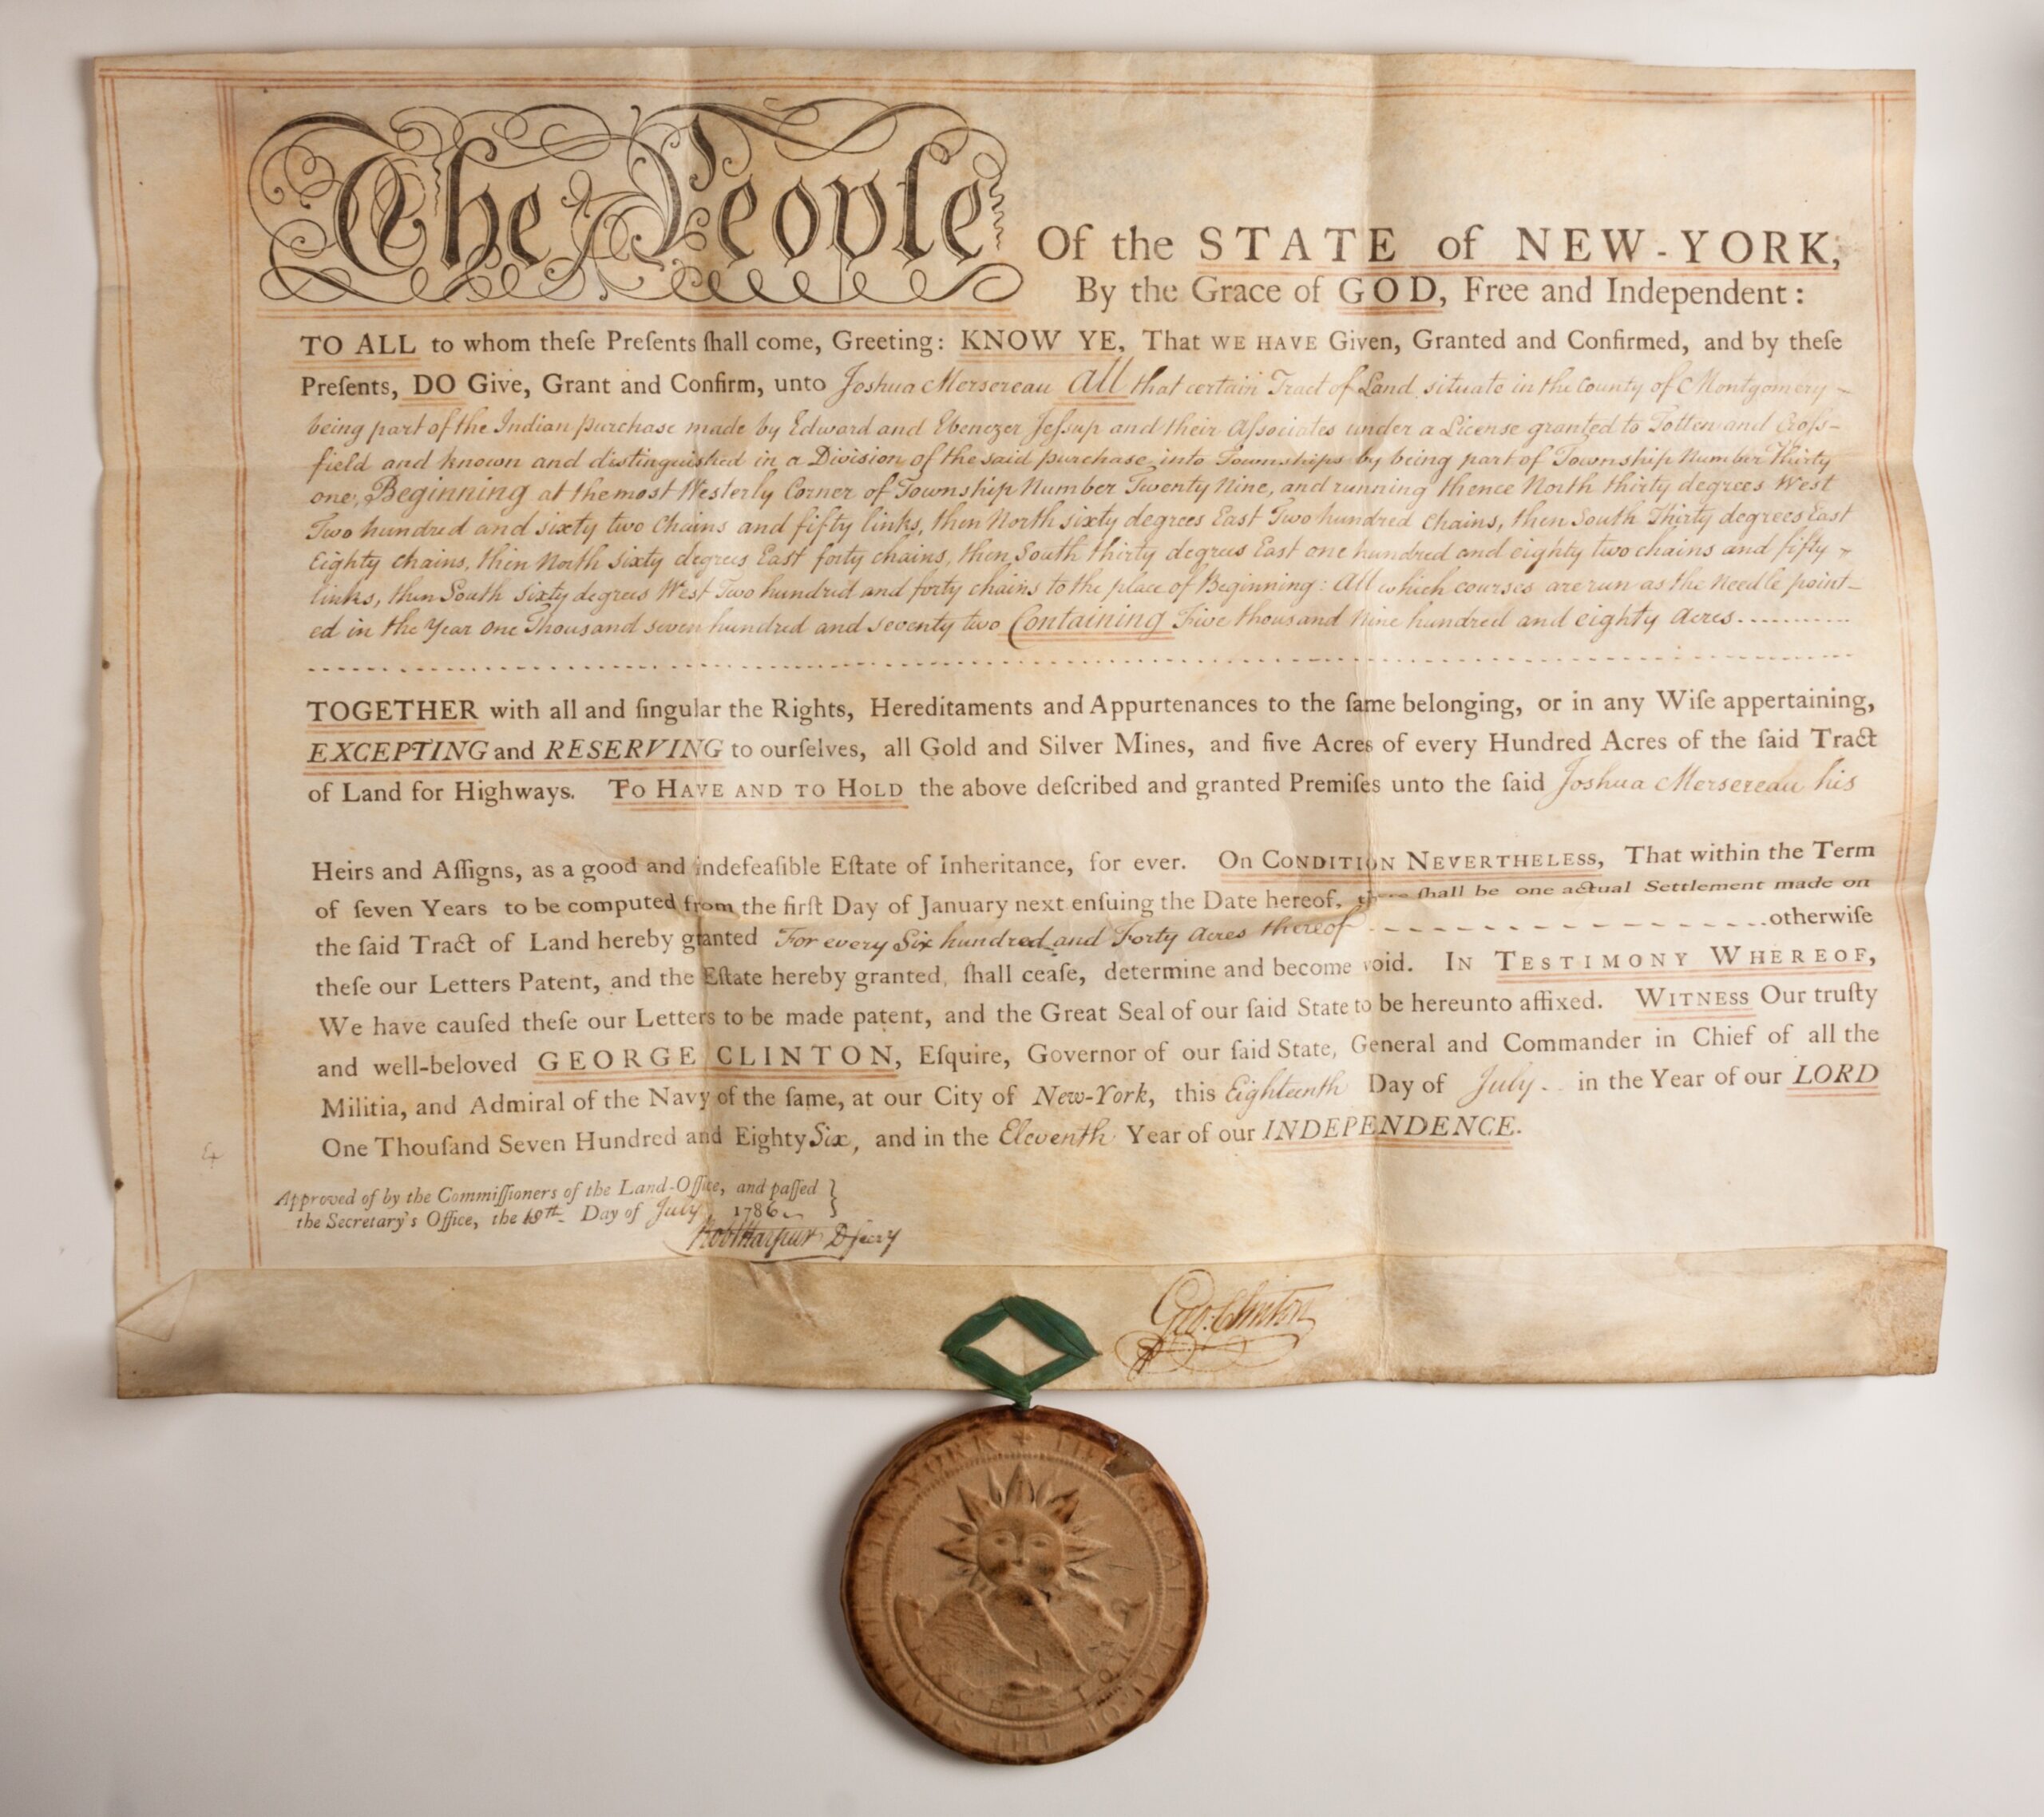 New-York Letters Patent and Seal, 1786